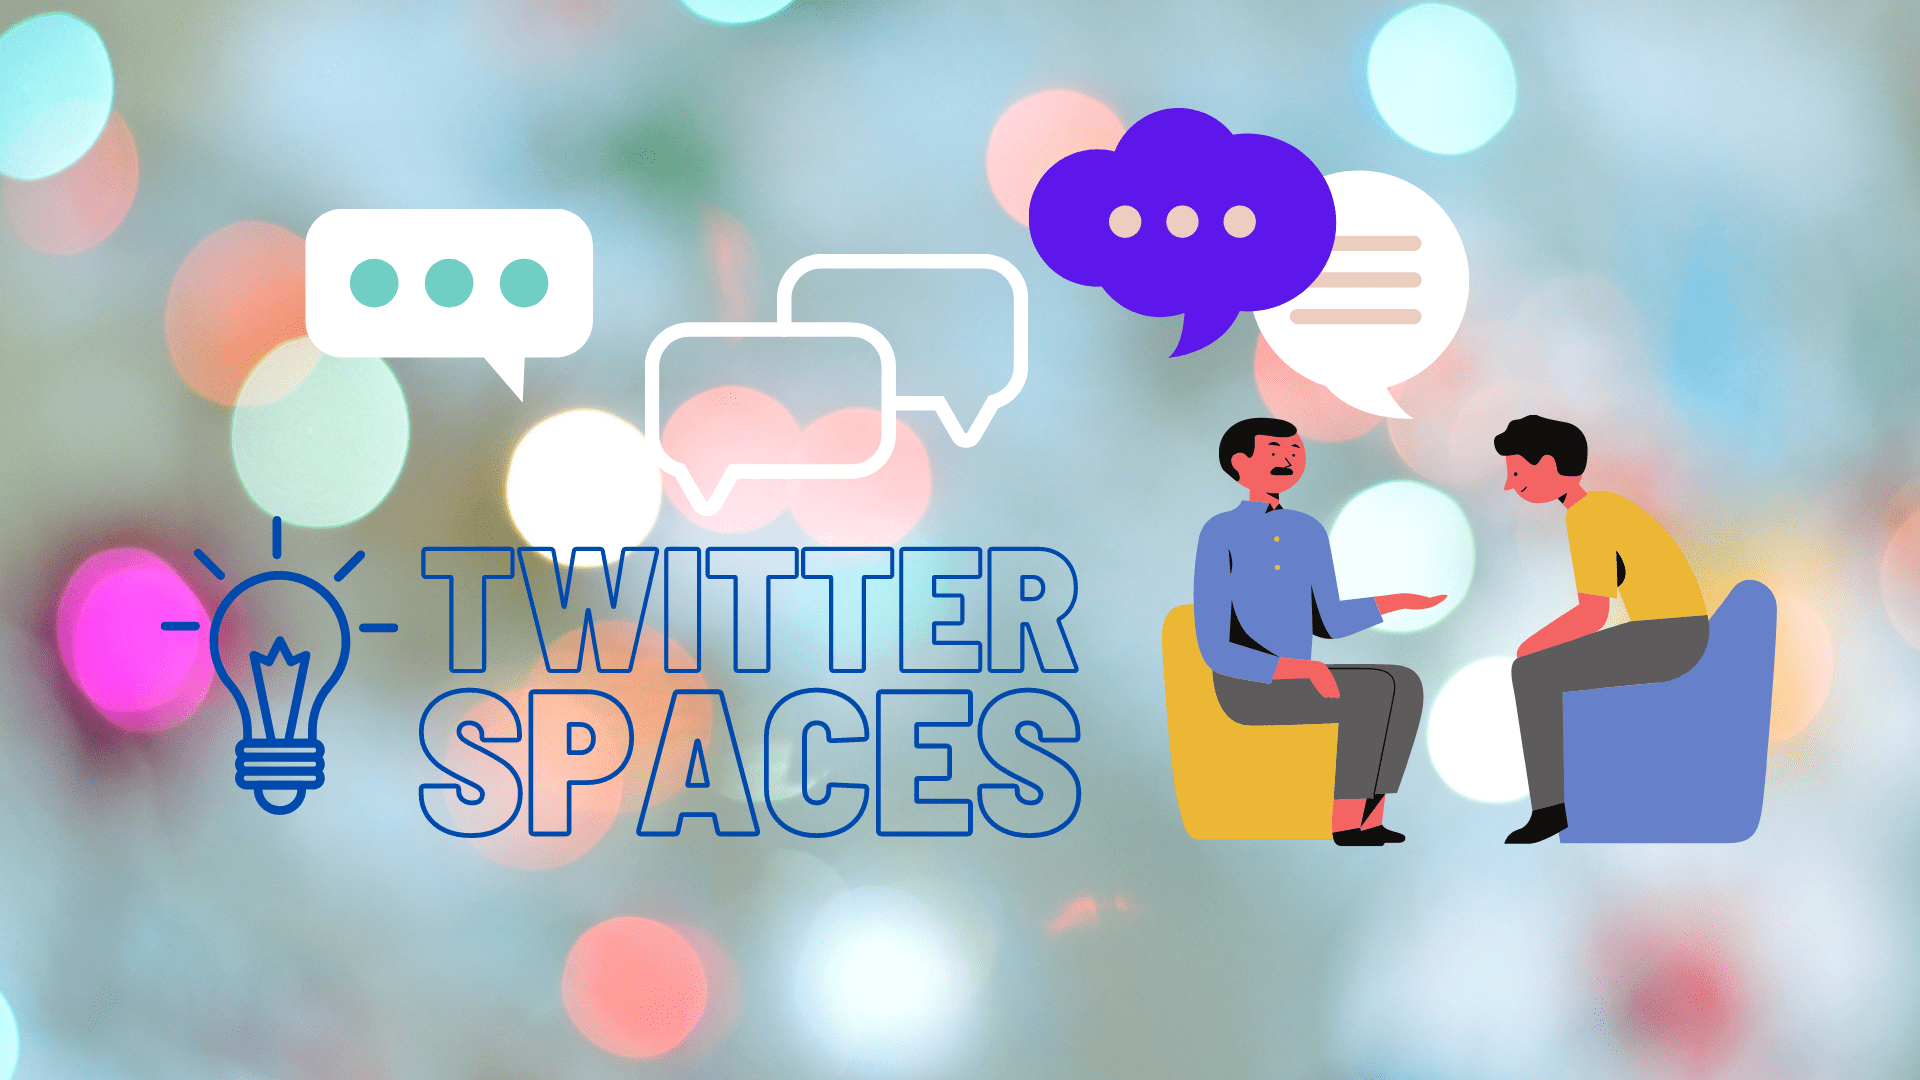 TWITTER SPACES